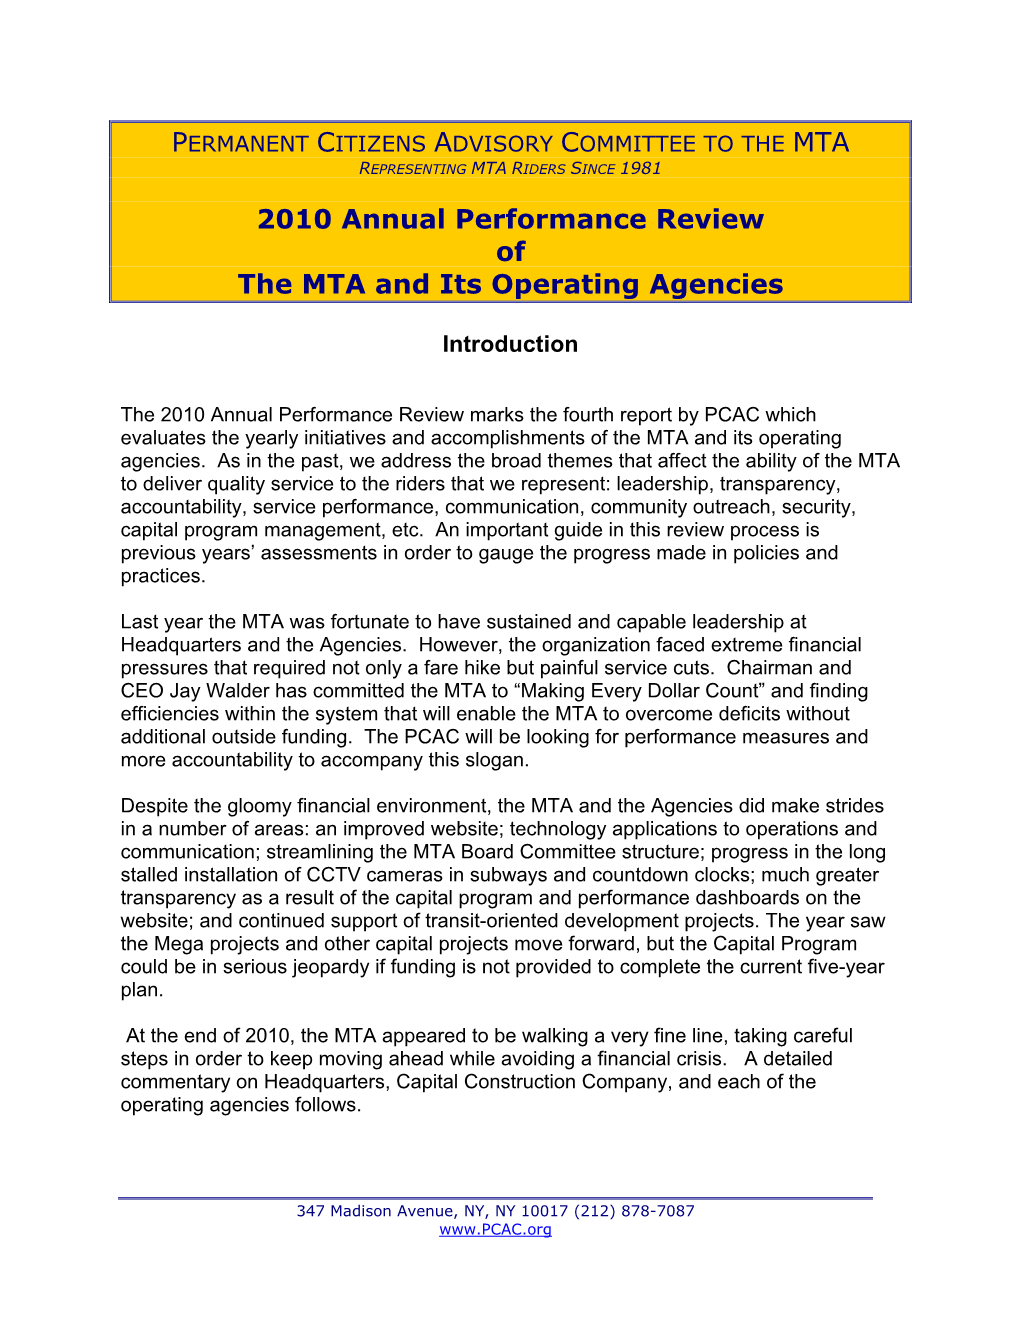 2010 MTA Annual Performance Review